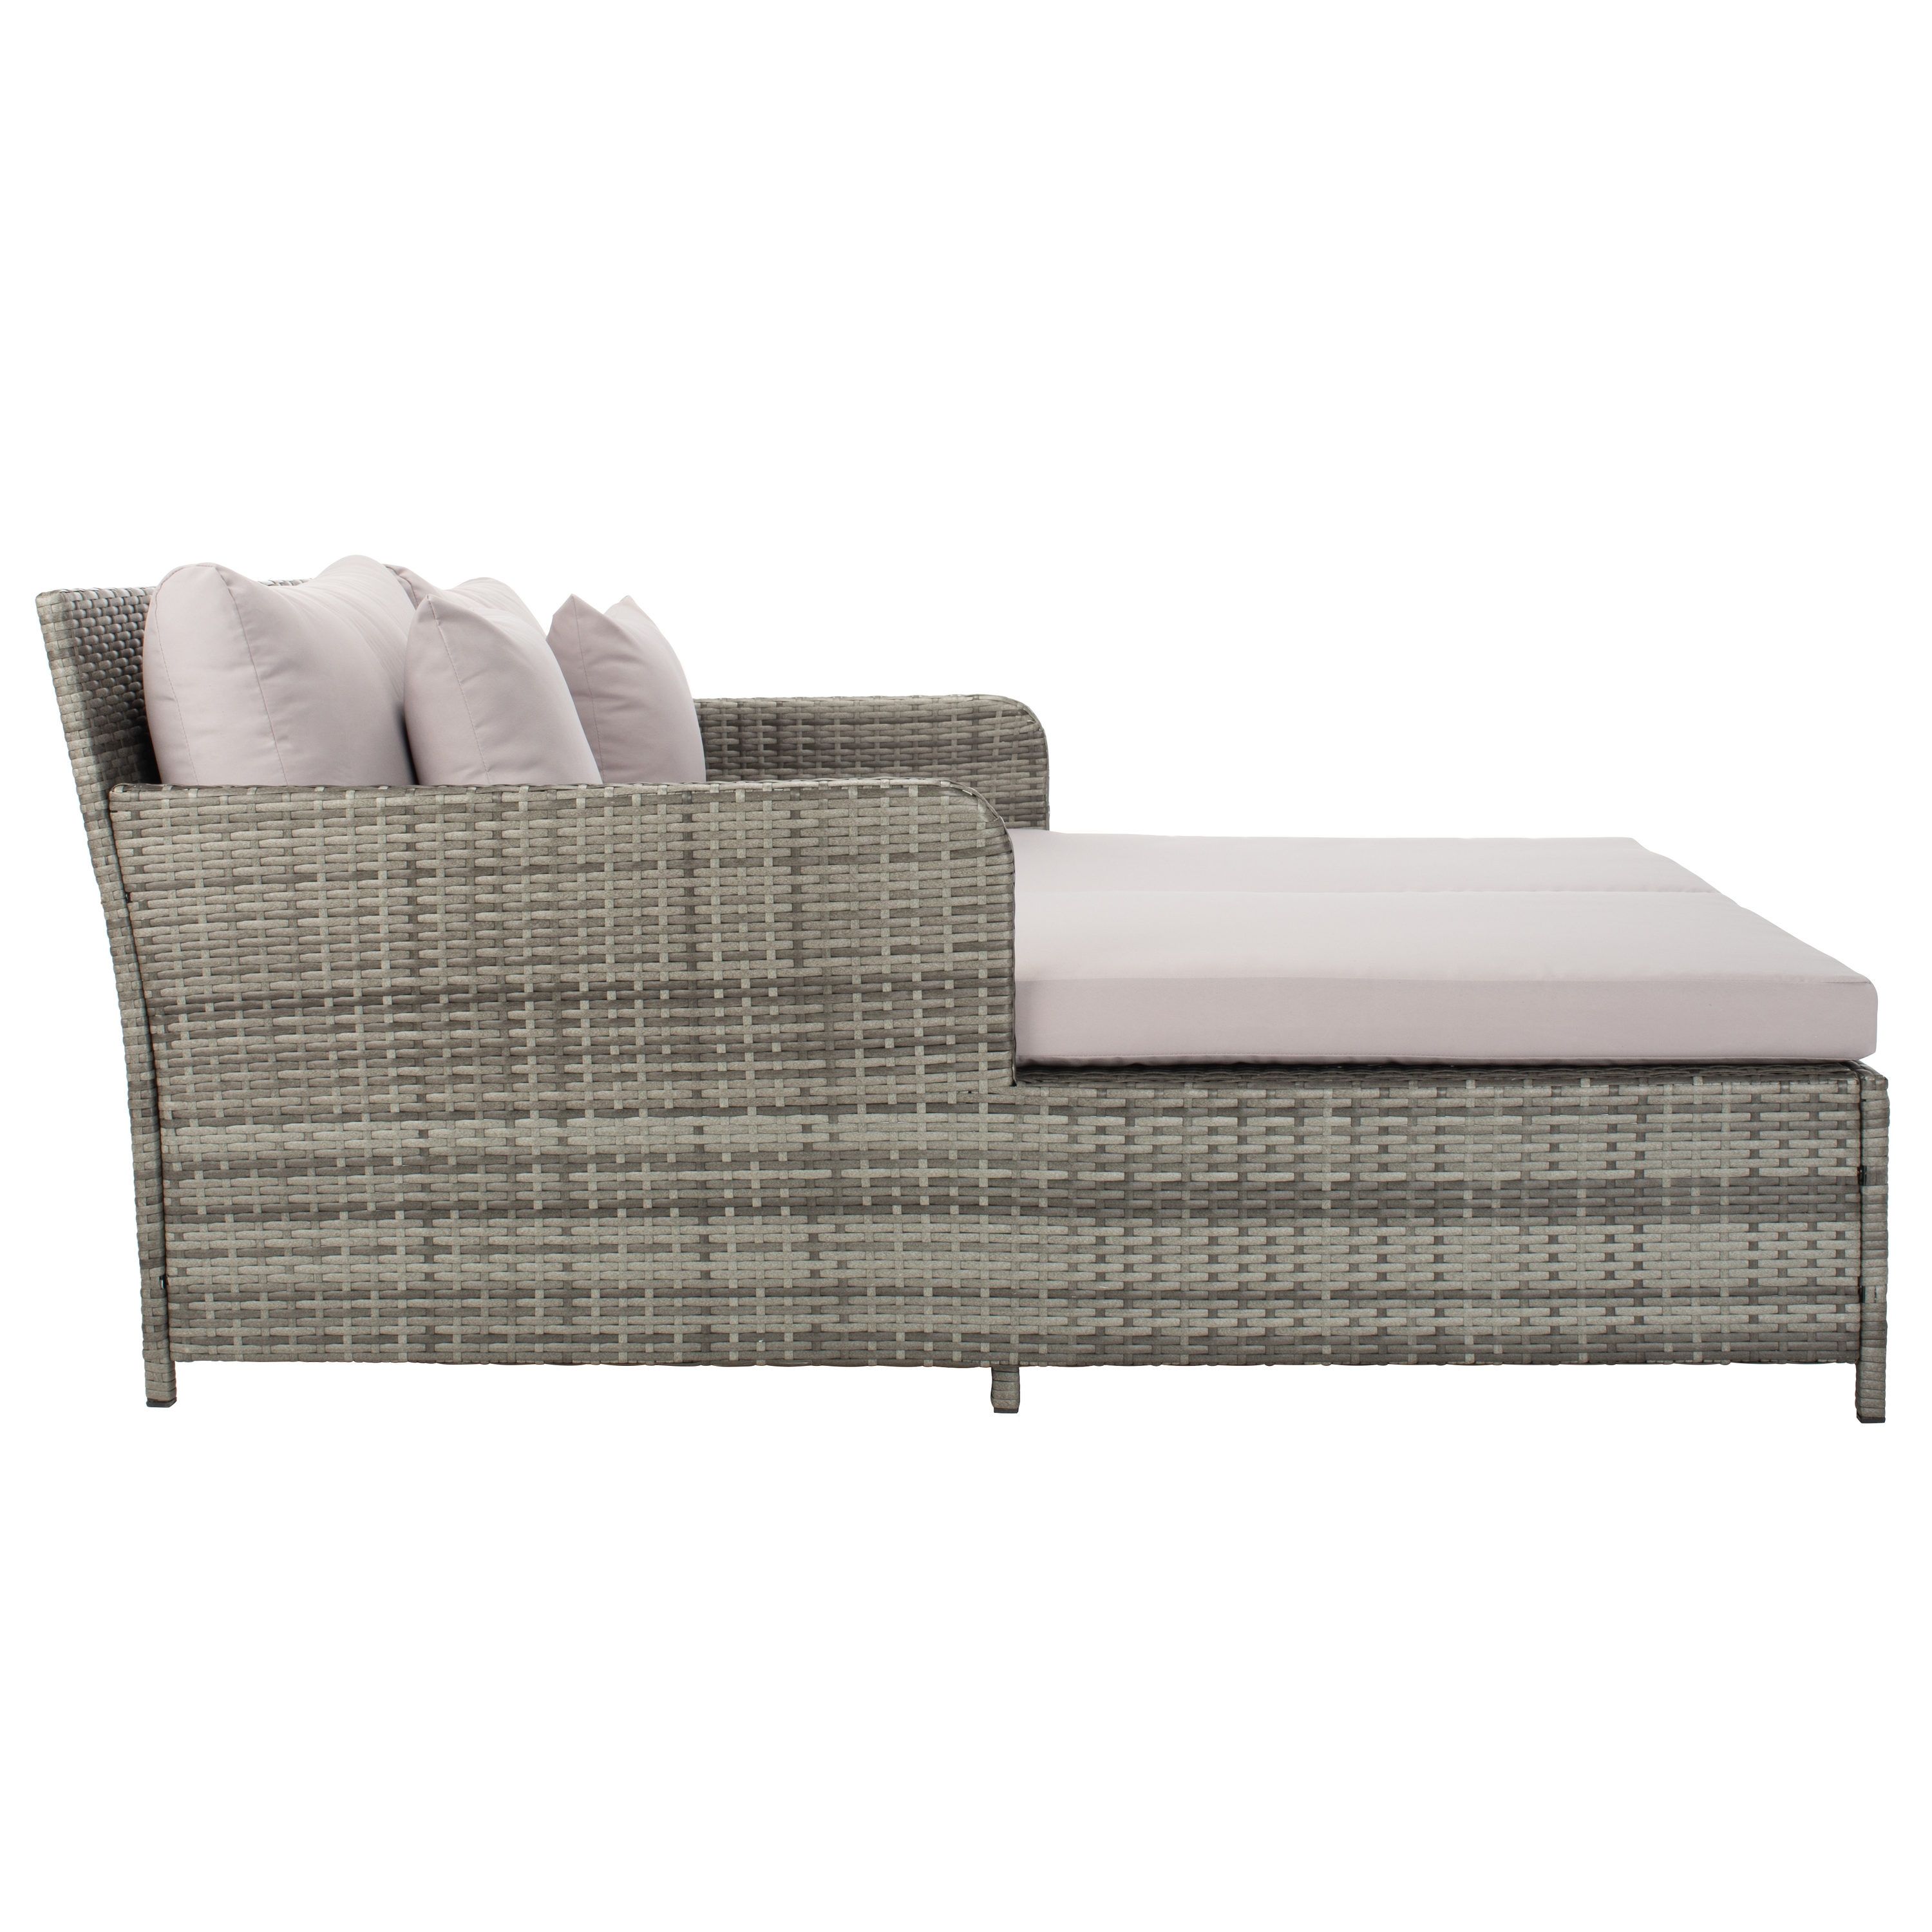 Safavieh PAT7500B Outdoor Collection Cadeo Grey Cushion Daybed 